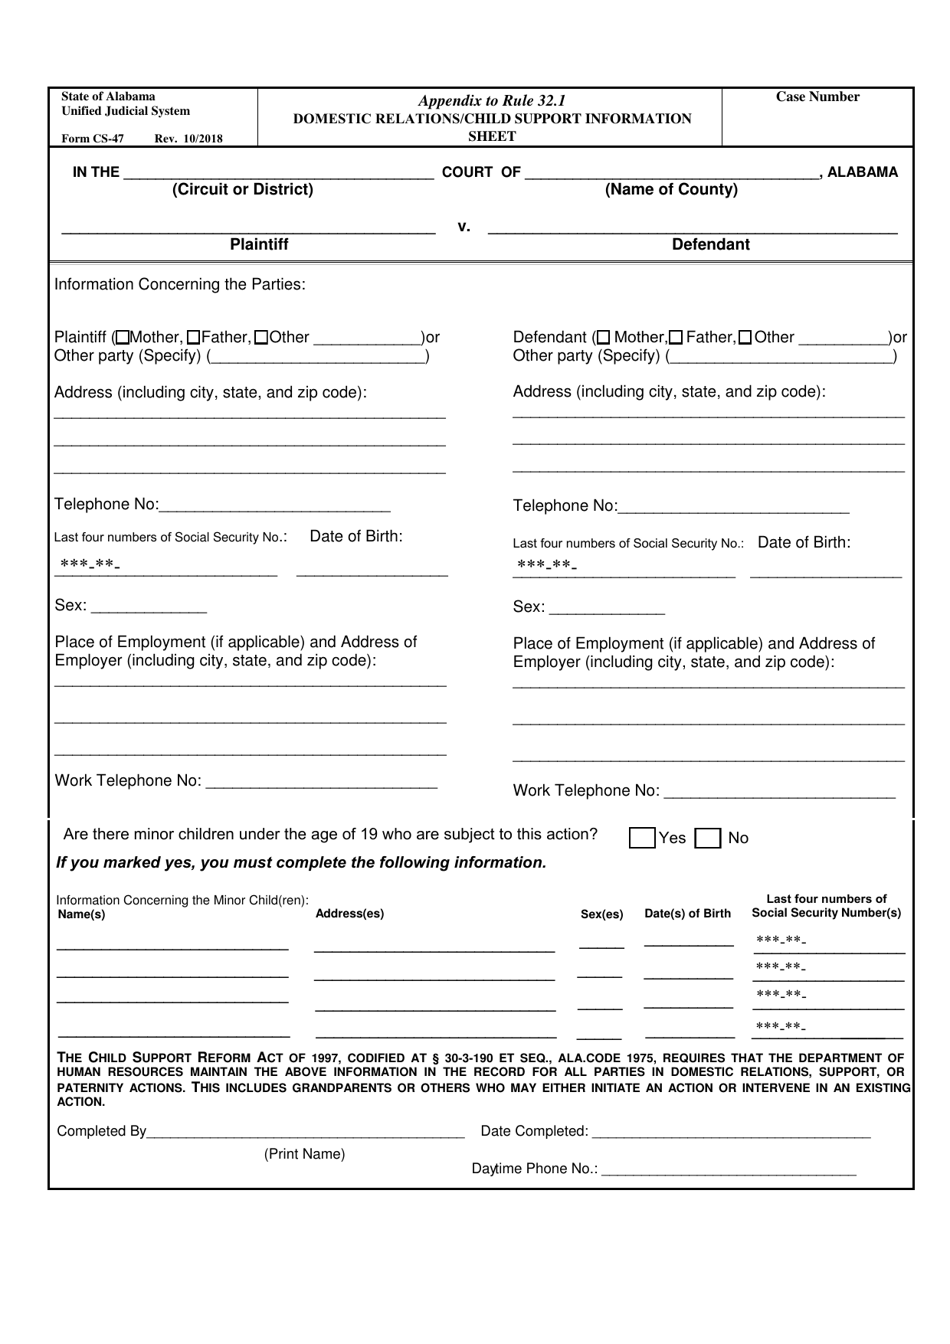 Form CS-47 Domestic Relations/Child Support Information Sheet - Alabama, Page 1